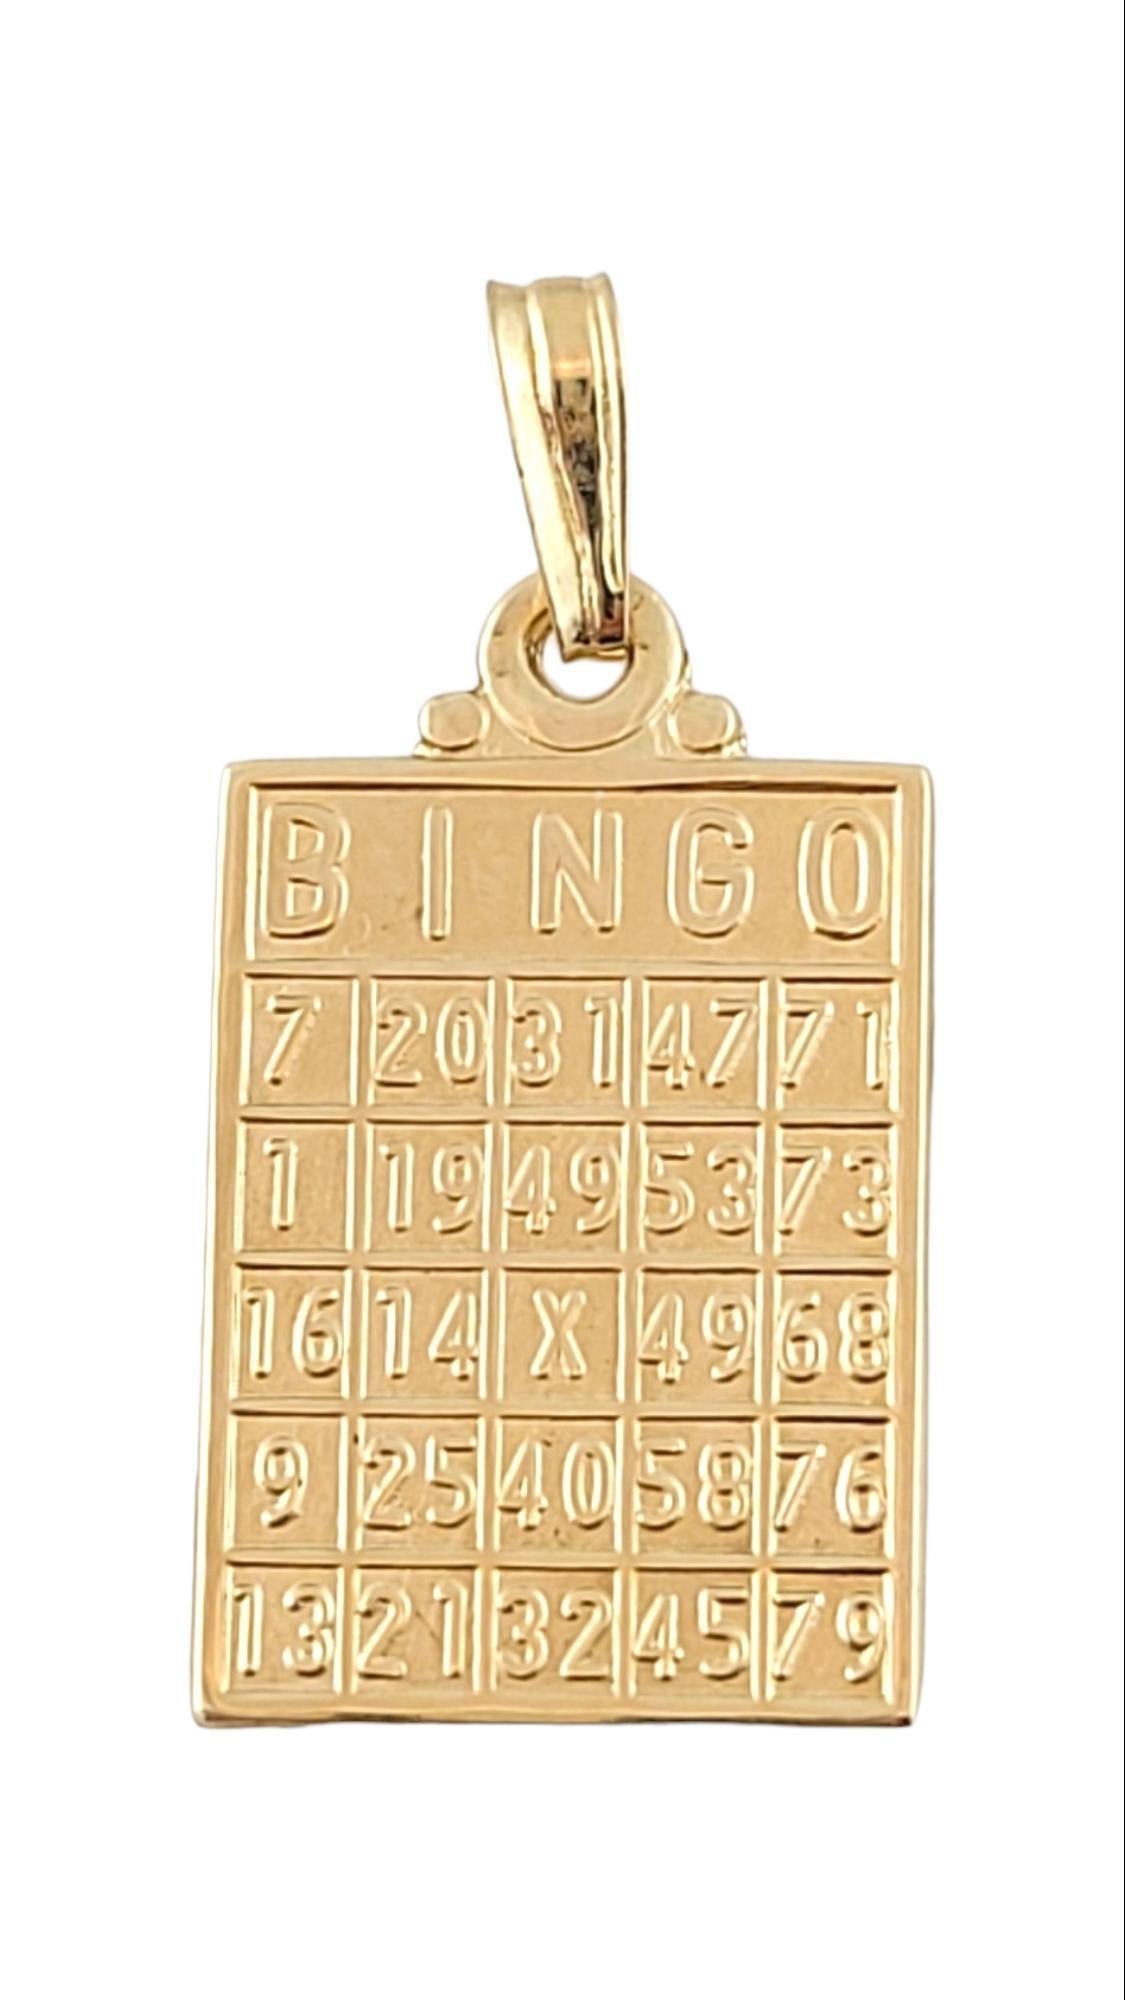 14K Yellow Gold Bingo Card Charm

This adorable 14K gold charm uses perfect detailing to represent a bingo card and would make the best gift for a bingo lover!

Size: 19.6mm X 11.9mm X 0.5mm
Length w/ bail: 24.8mm

Weight: 1.29 g/ 0.8 dwt

Hallmark: